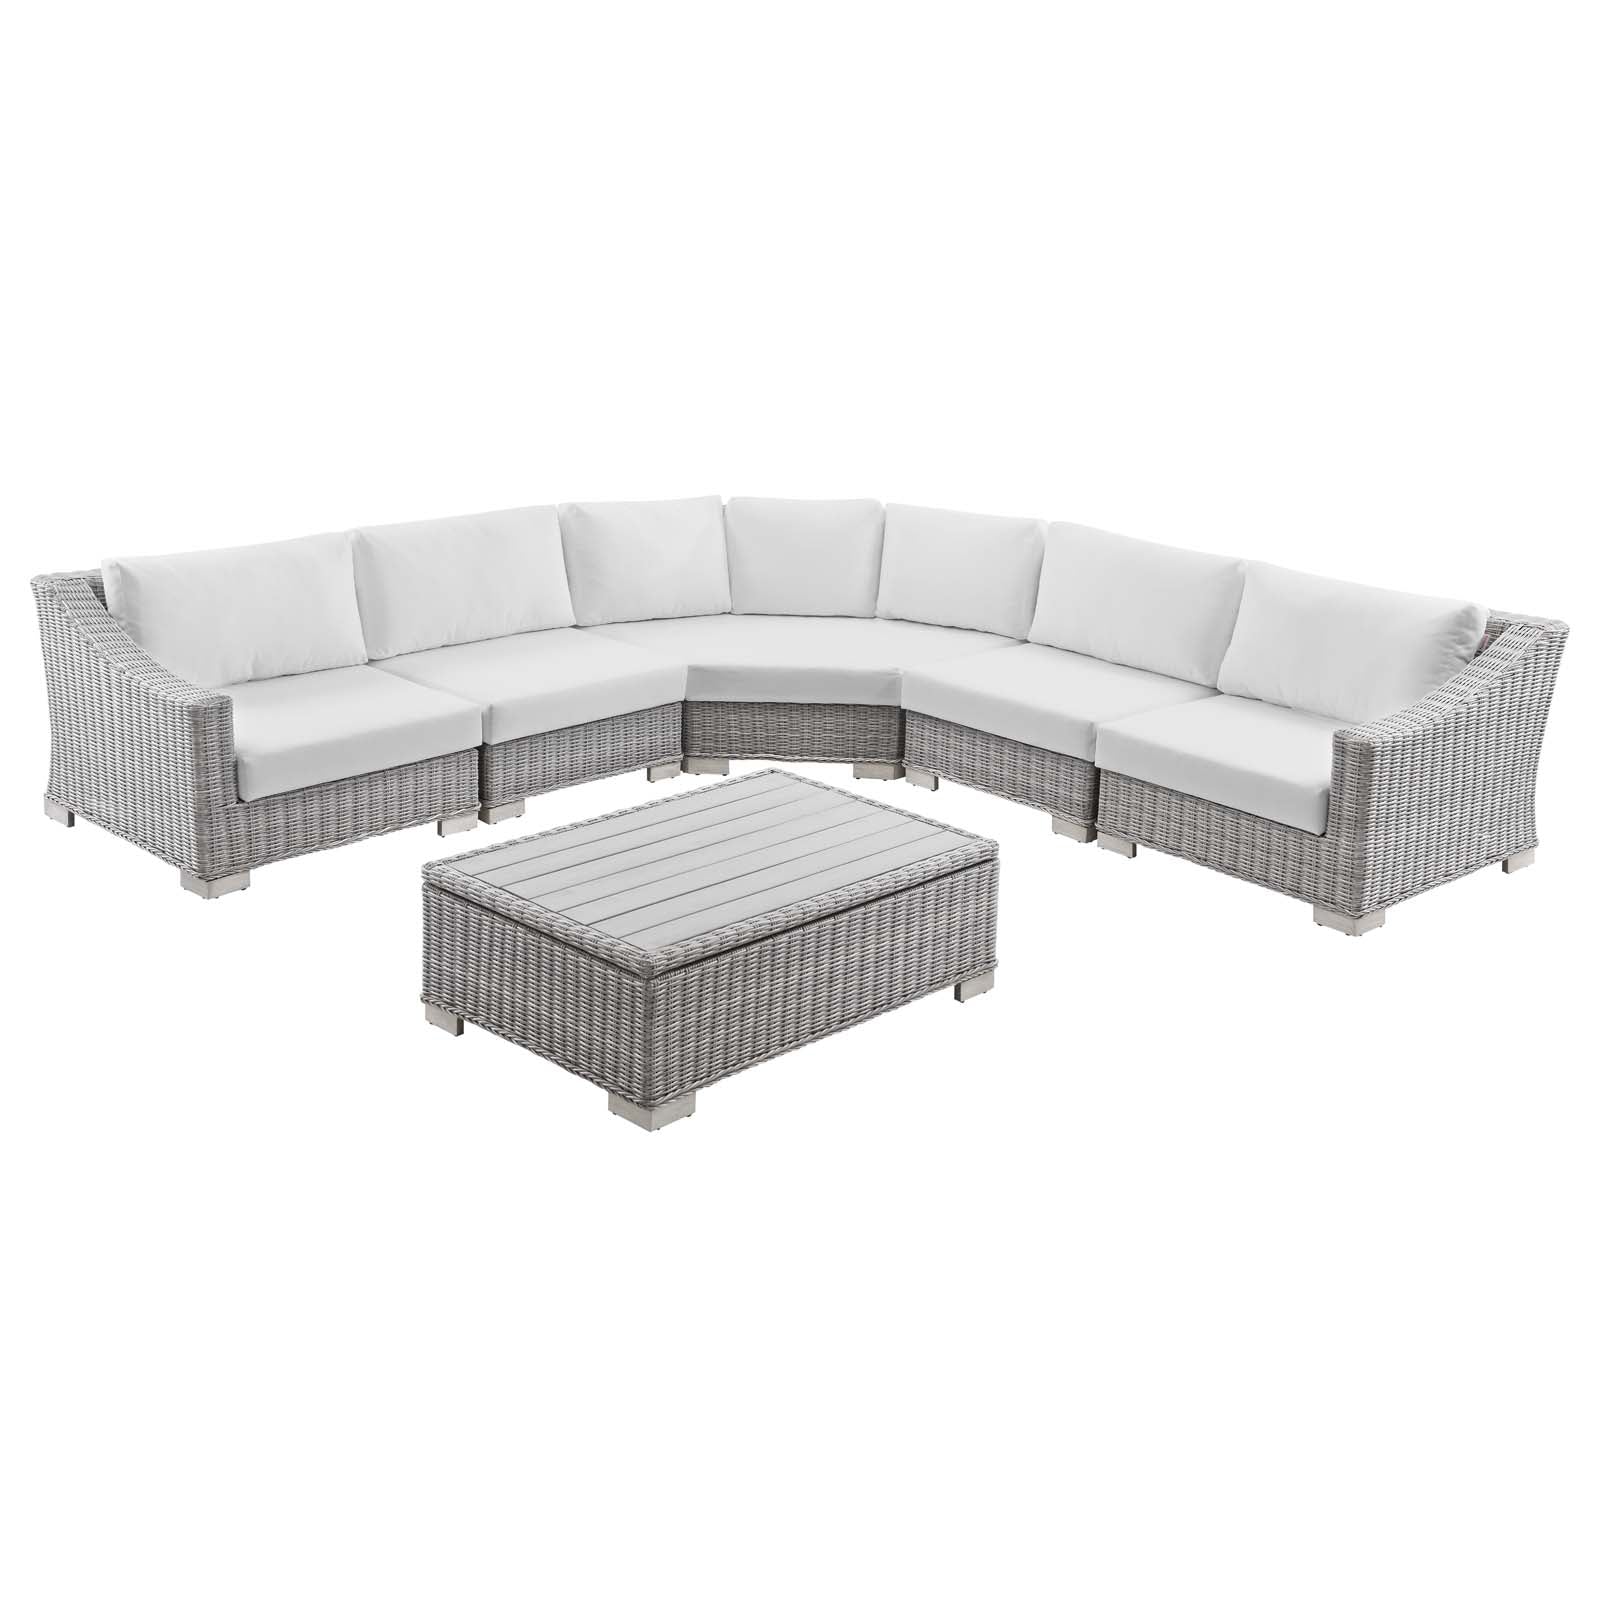 Modway Outdoor Conversation Sets - Conway Outdoor Patio Wicker Rattan 6-Piece Sectional Sofa Furniture Set Light Gray | White